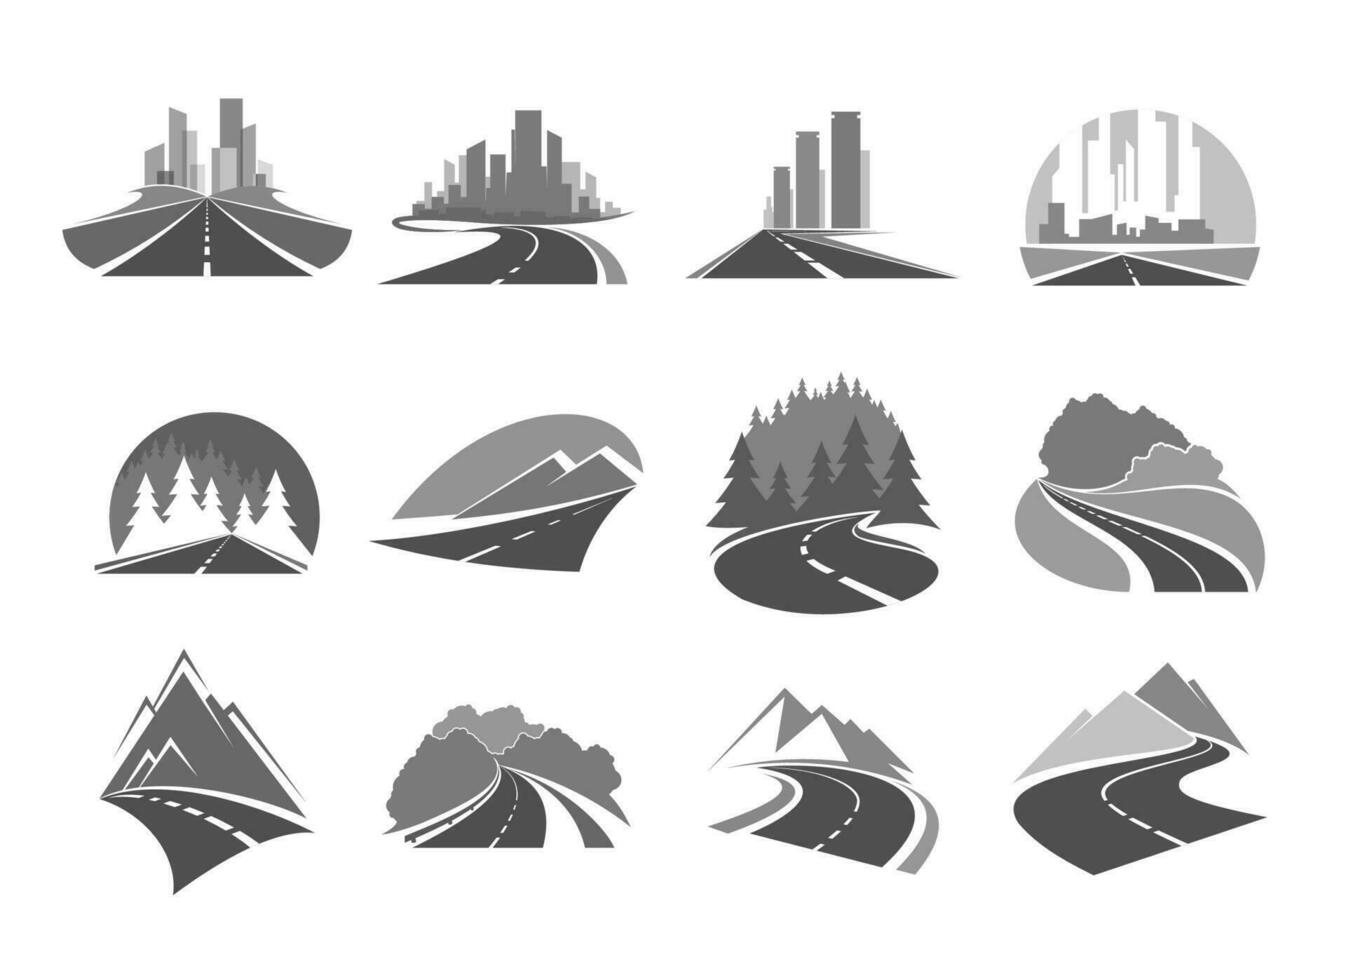 Road highway icons. City, forest and mountains vector